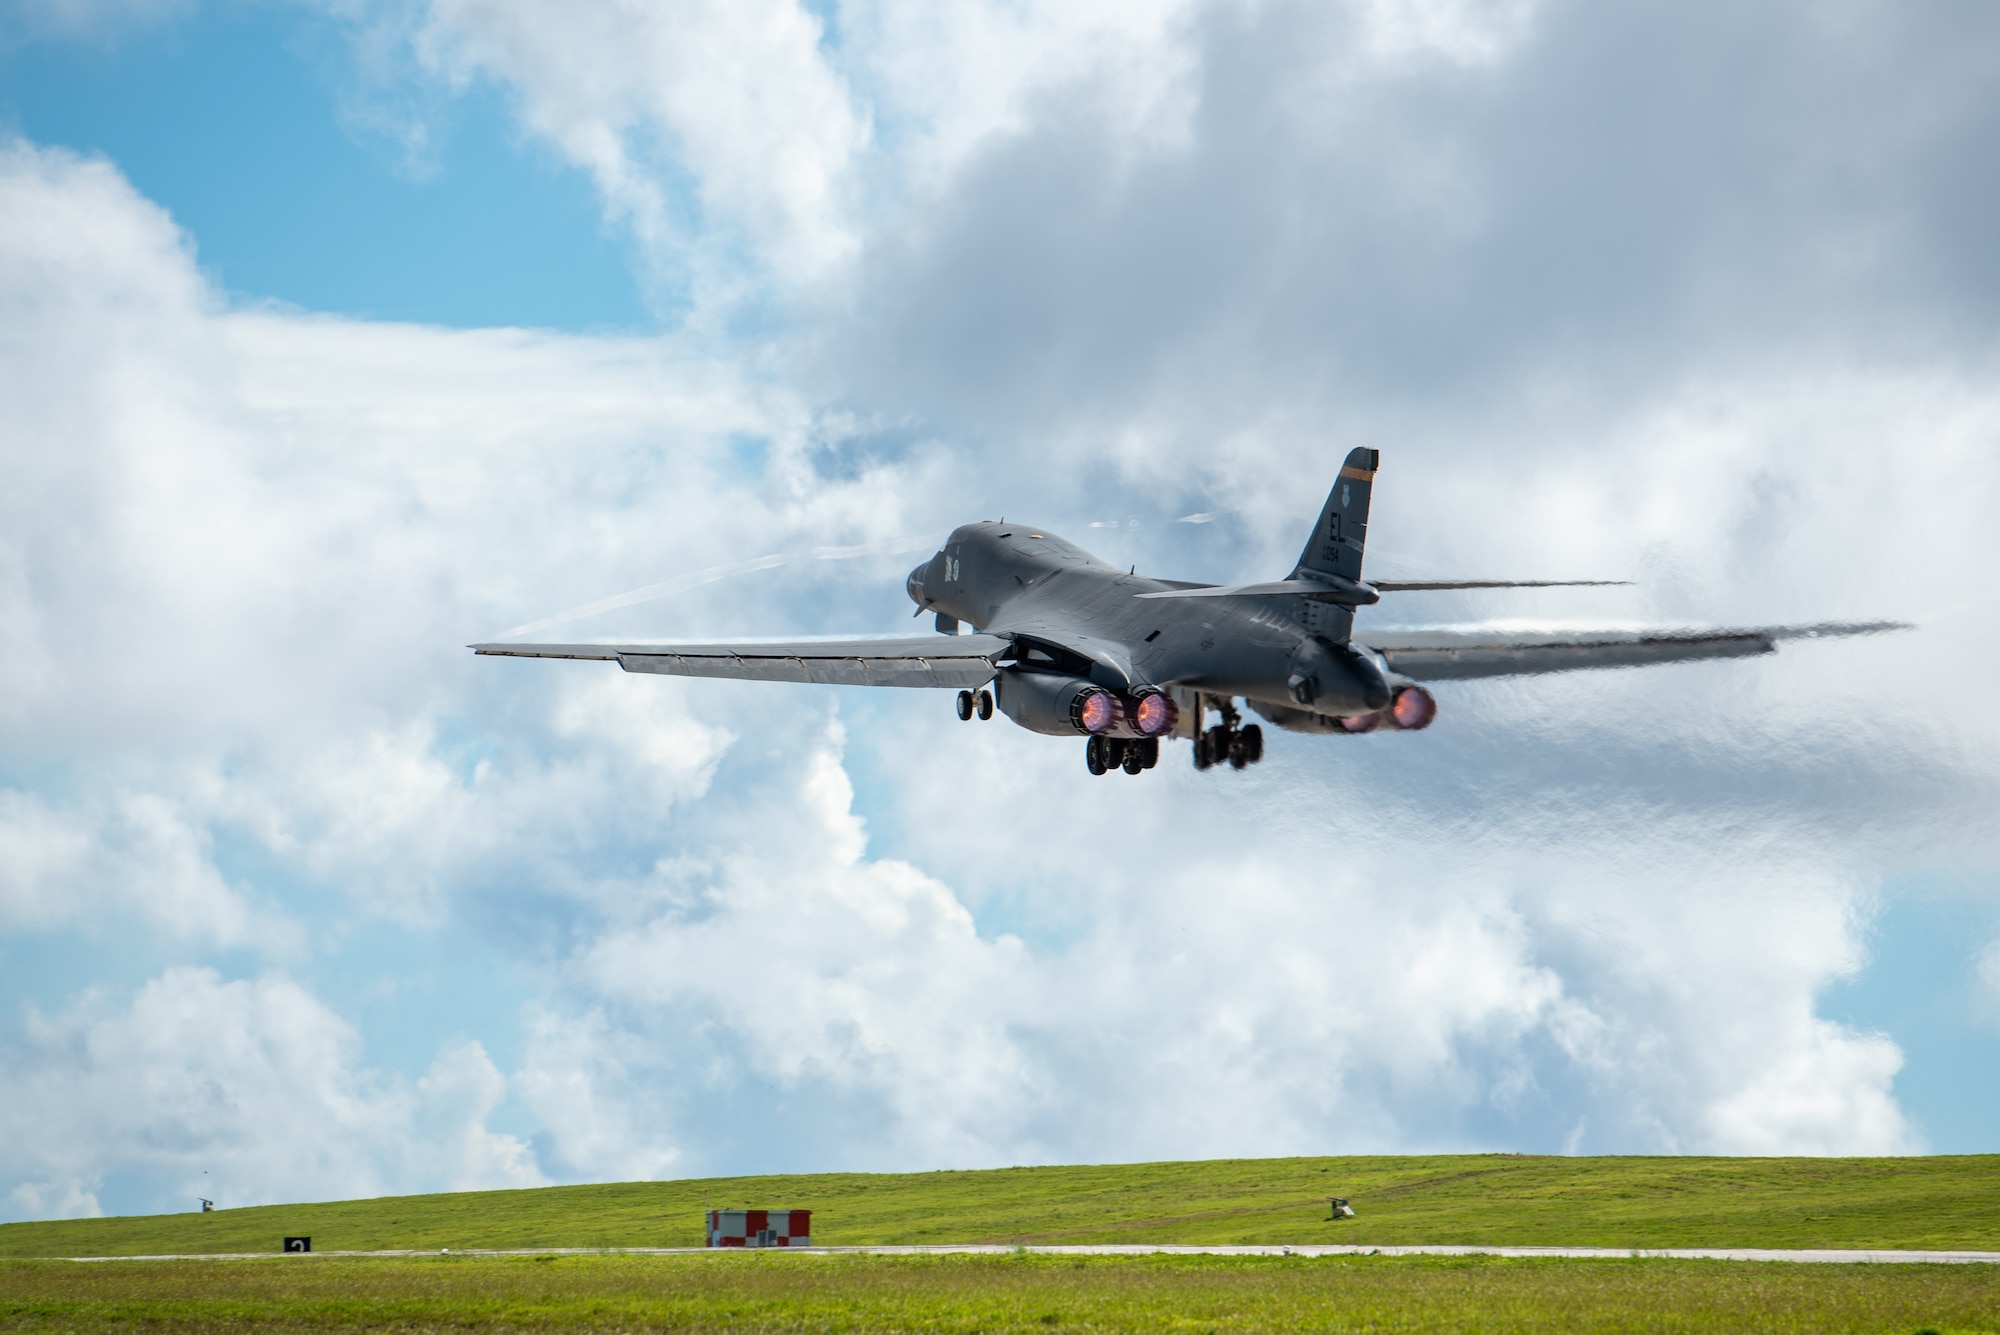 A U.S. Air Force B-1B Lancer assigned to the 37th Expeditionary Bomb Squadron, Ellsworth Air Force Base, South Dakota, takes off in support of a Bomber Task Force mission at Andersen AFB, Guam, Nov. 7, 2022. BTF missions are designed to showcase Pacific Air Force’s ability to deter, deny and dominate any influence or aggression from adversaries or competitors. (U.S. Air Force photo by Senior Airman Yosselin Campos)